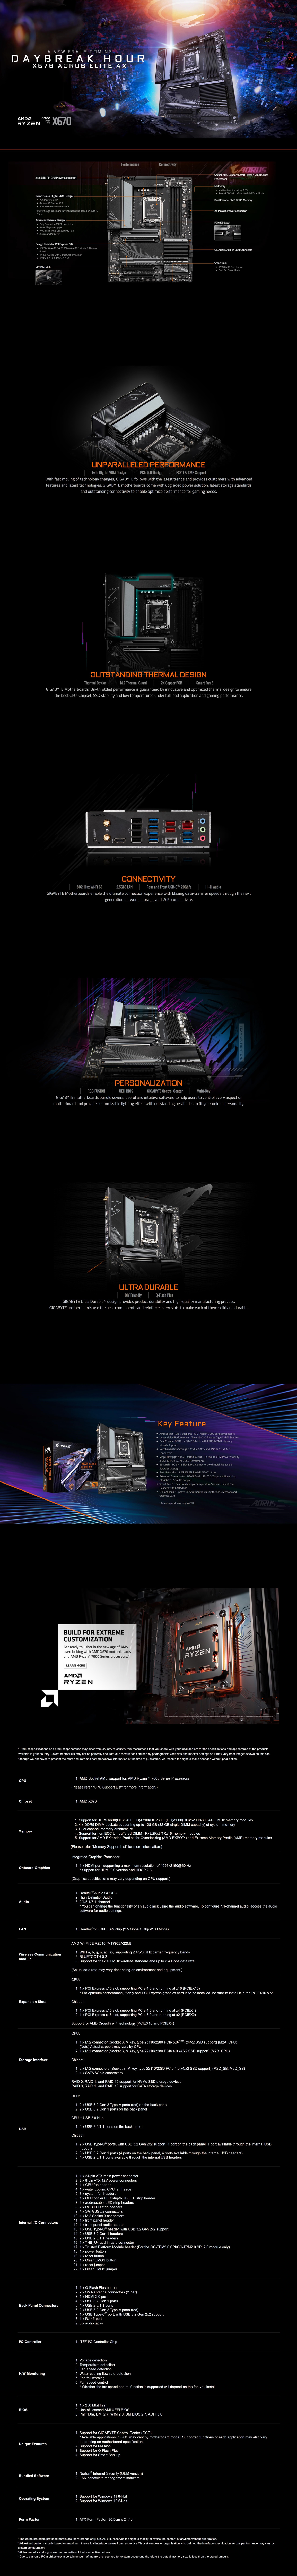 A large marketing image providing additional information about the product Gigabyte X670 Aorus Elite AX AM5 ATX Desktop Motherboard - Additional alt info not provided